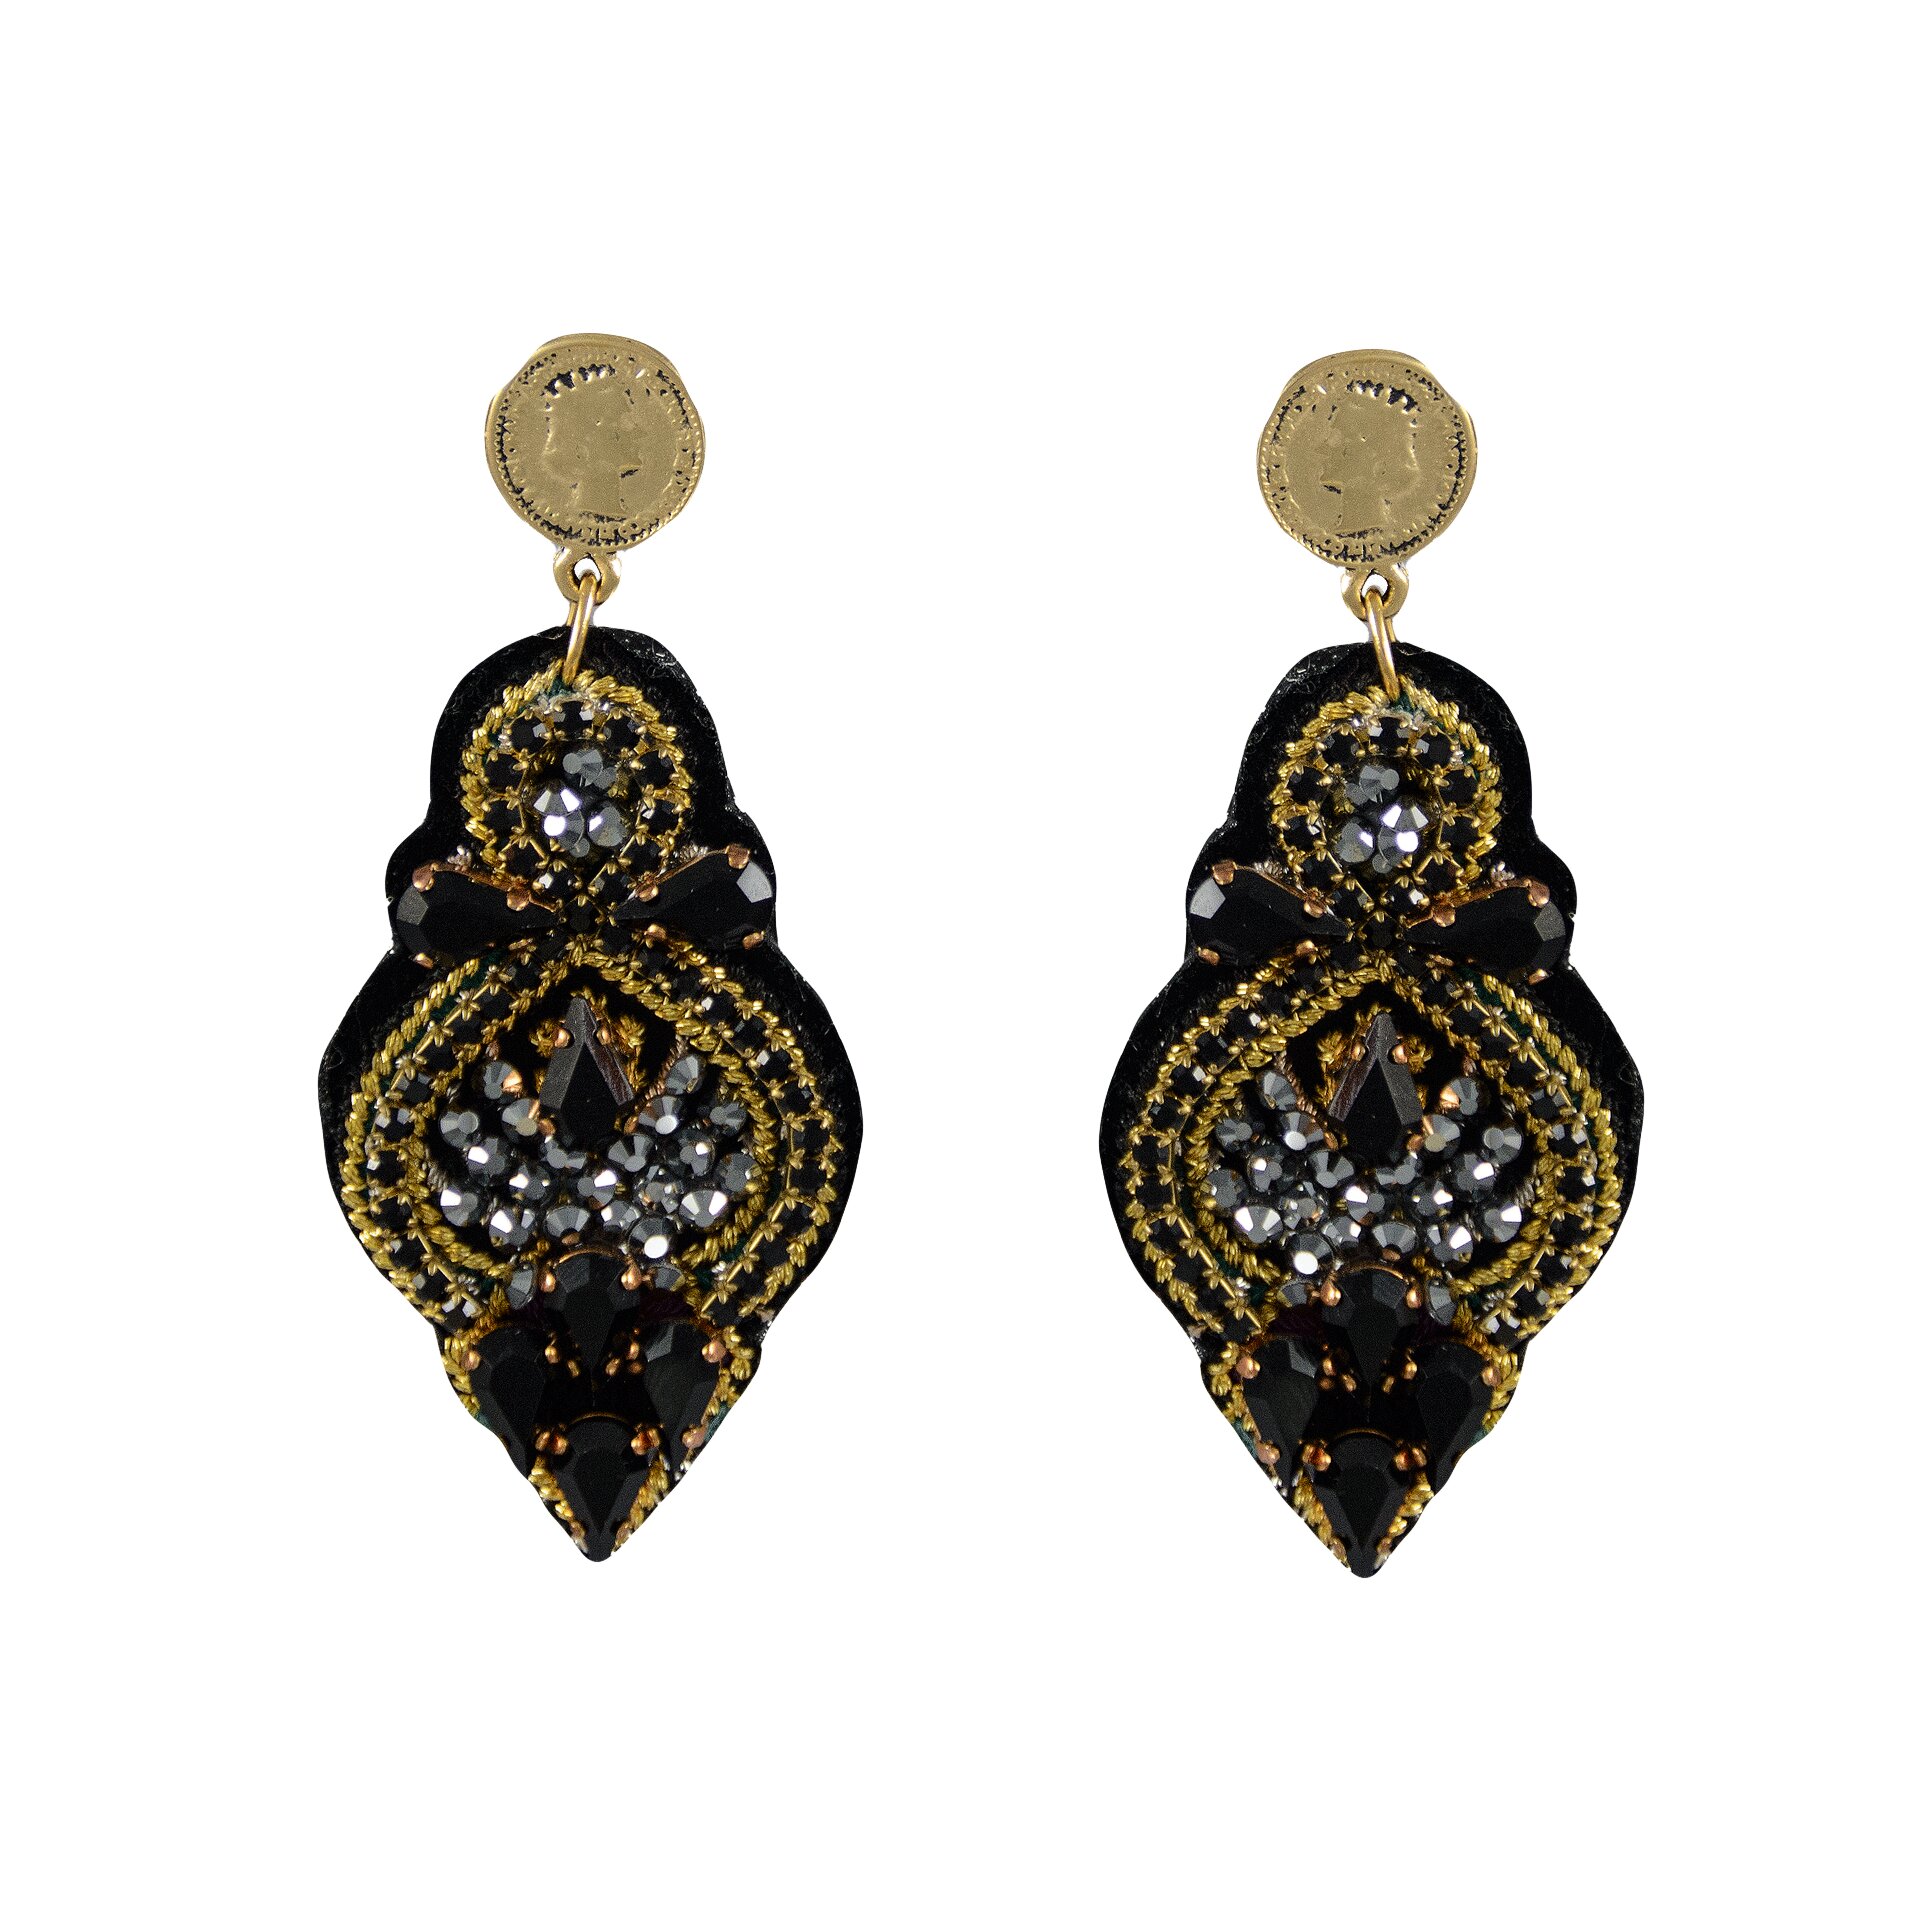 LINDA'S DREAM black earrings with gold elements